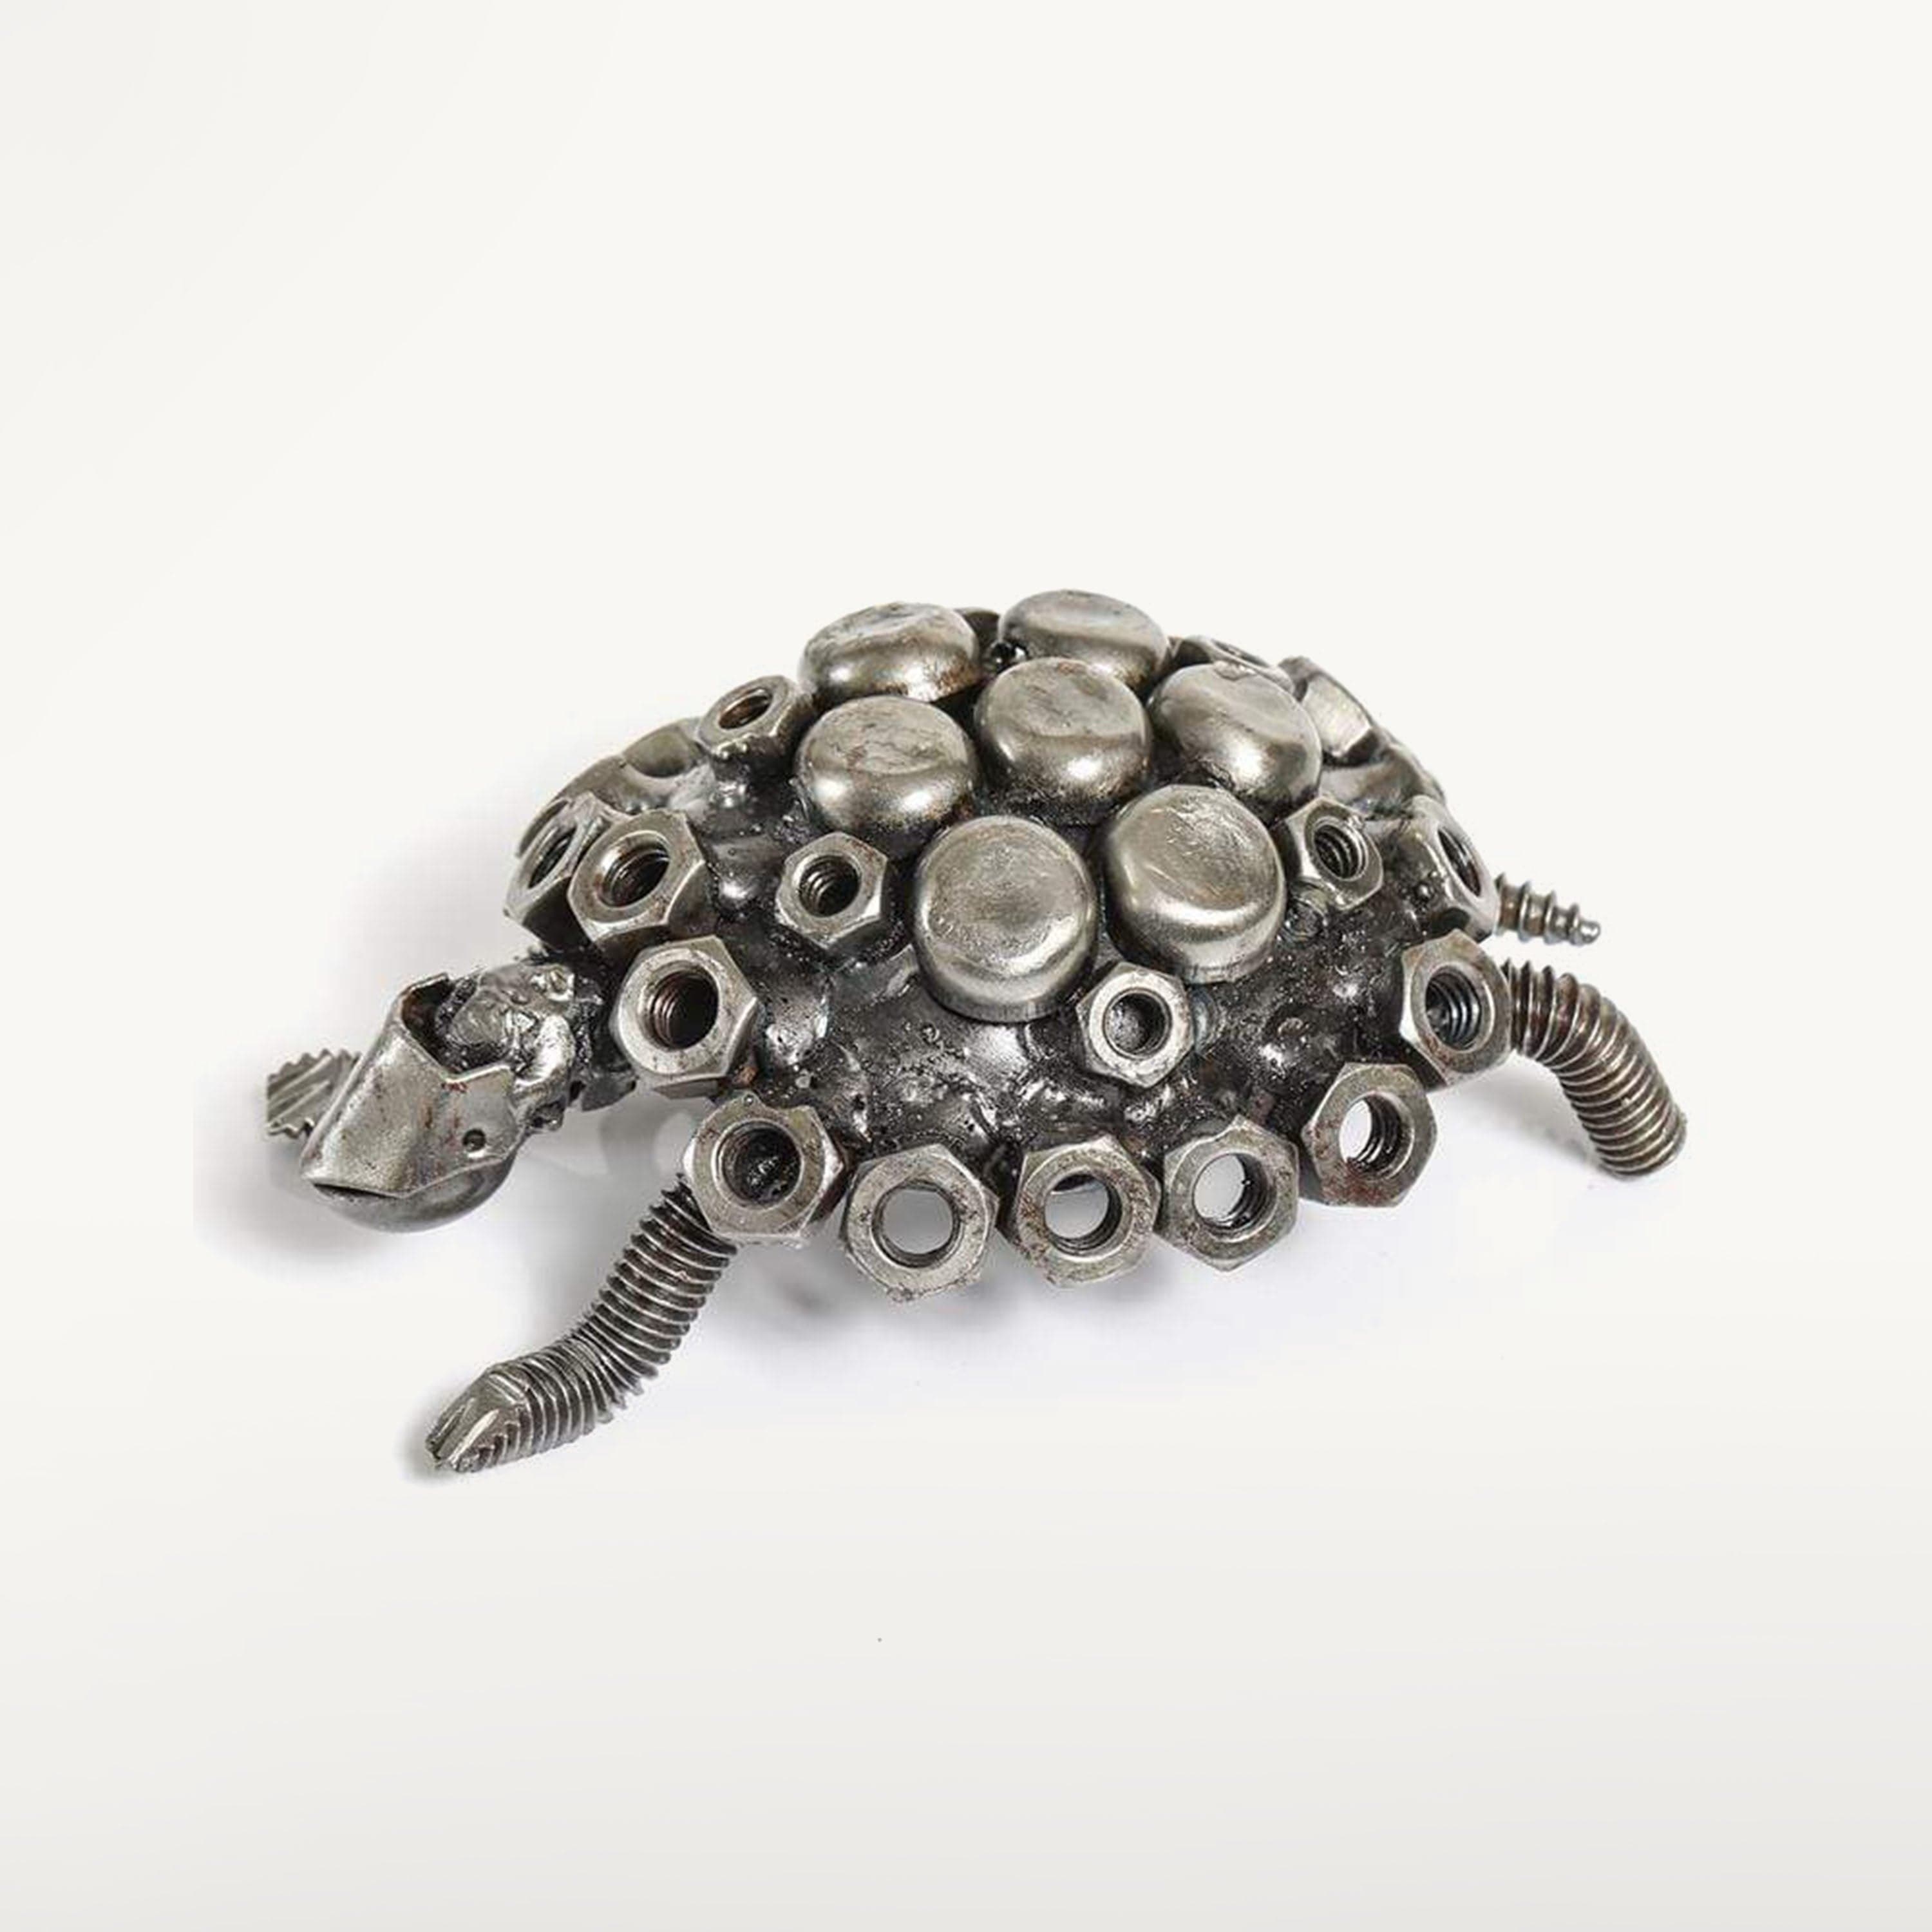 Kalifano Recycled Metal Art Turtle Recycled Metal Sculpture RMS-200T-N